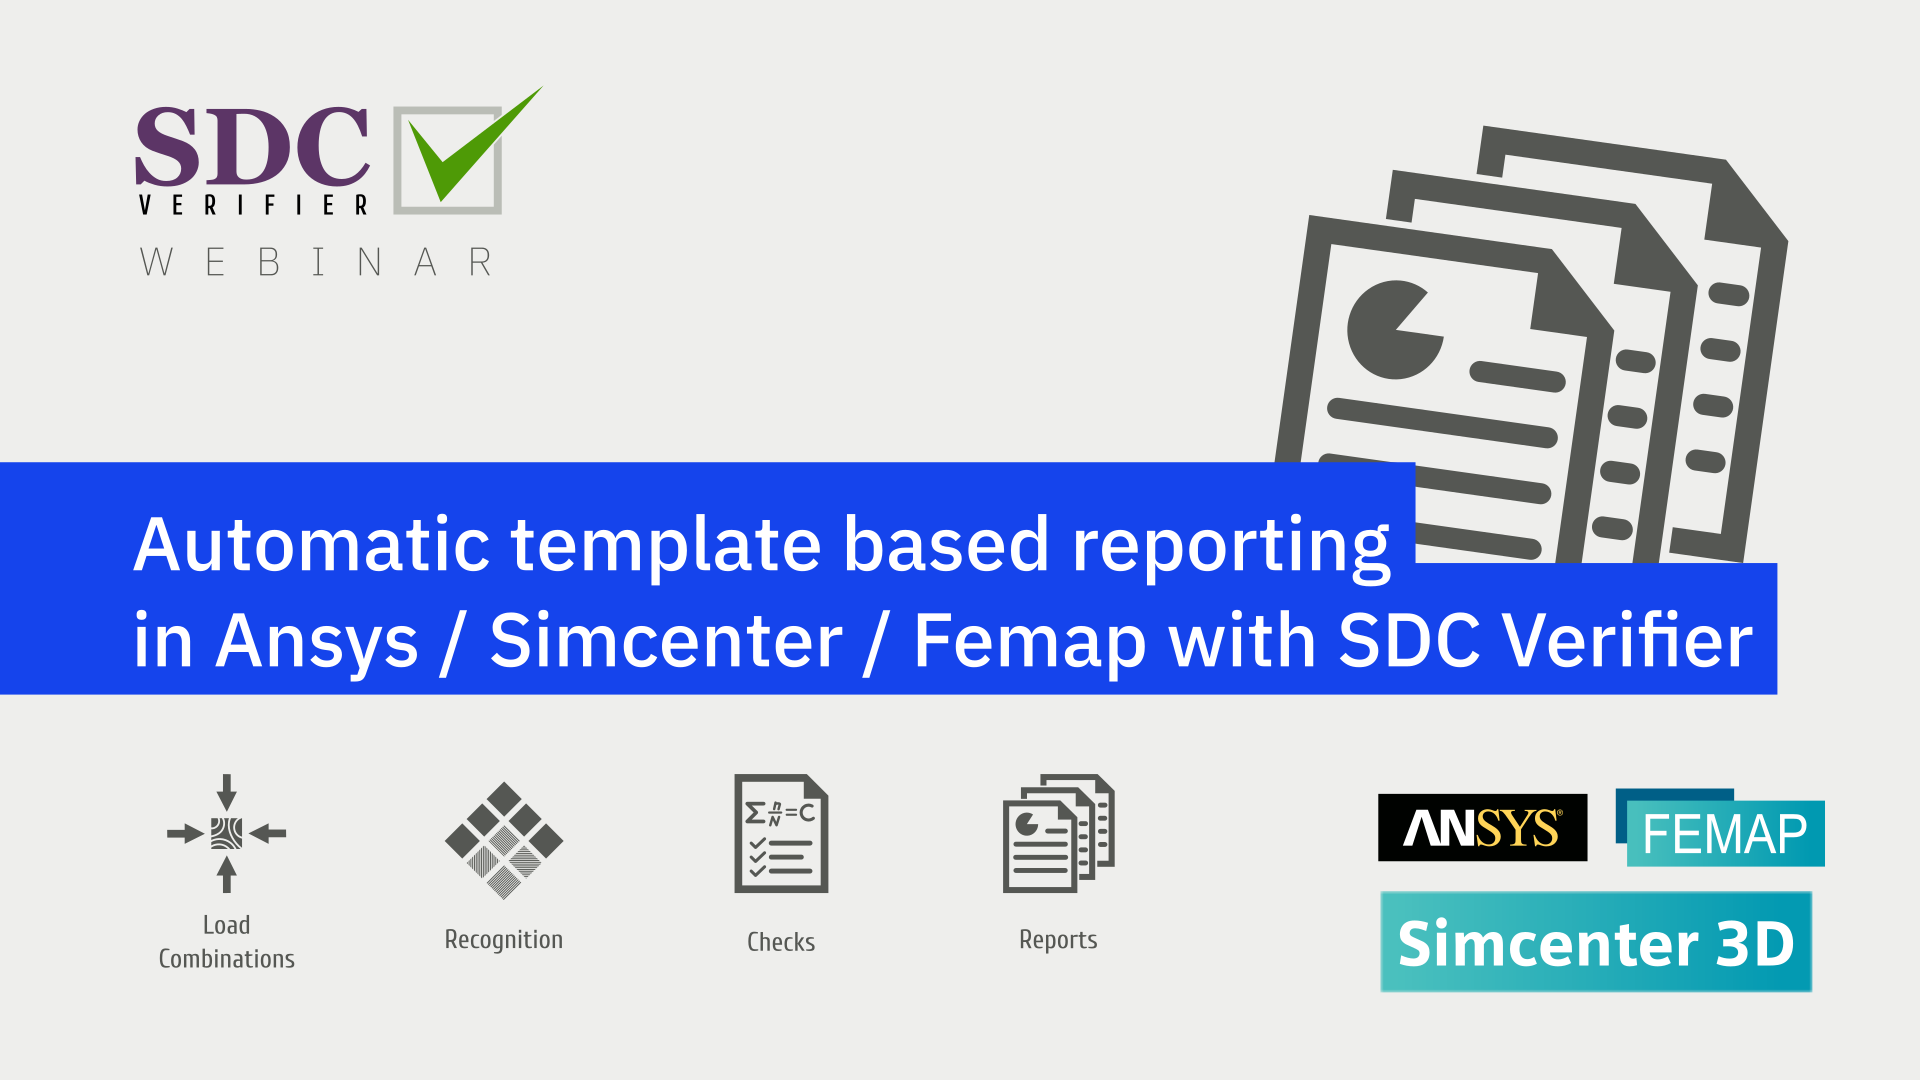 Invitation to Webinar Automatic template based reporting in Ansys / Simcenter / Femap with SDC Verifier. 9 April 2020